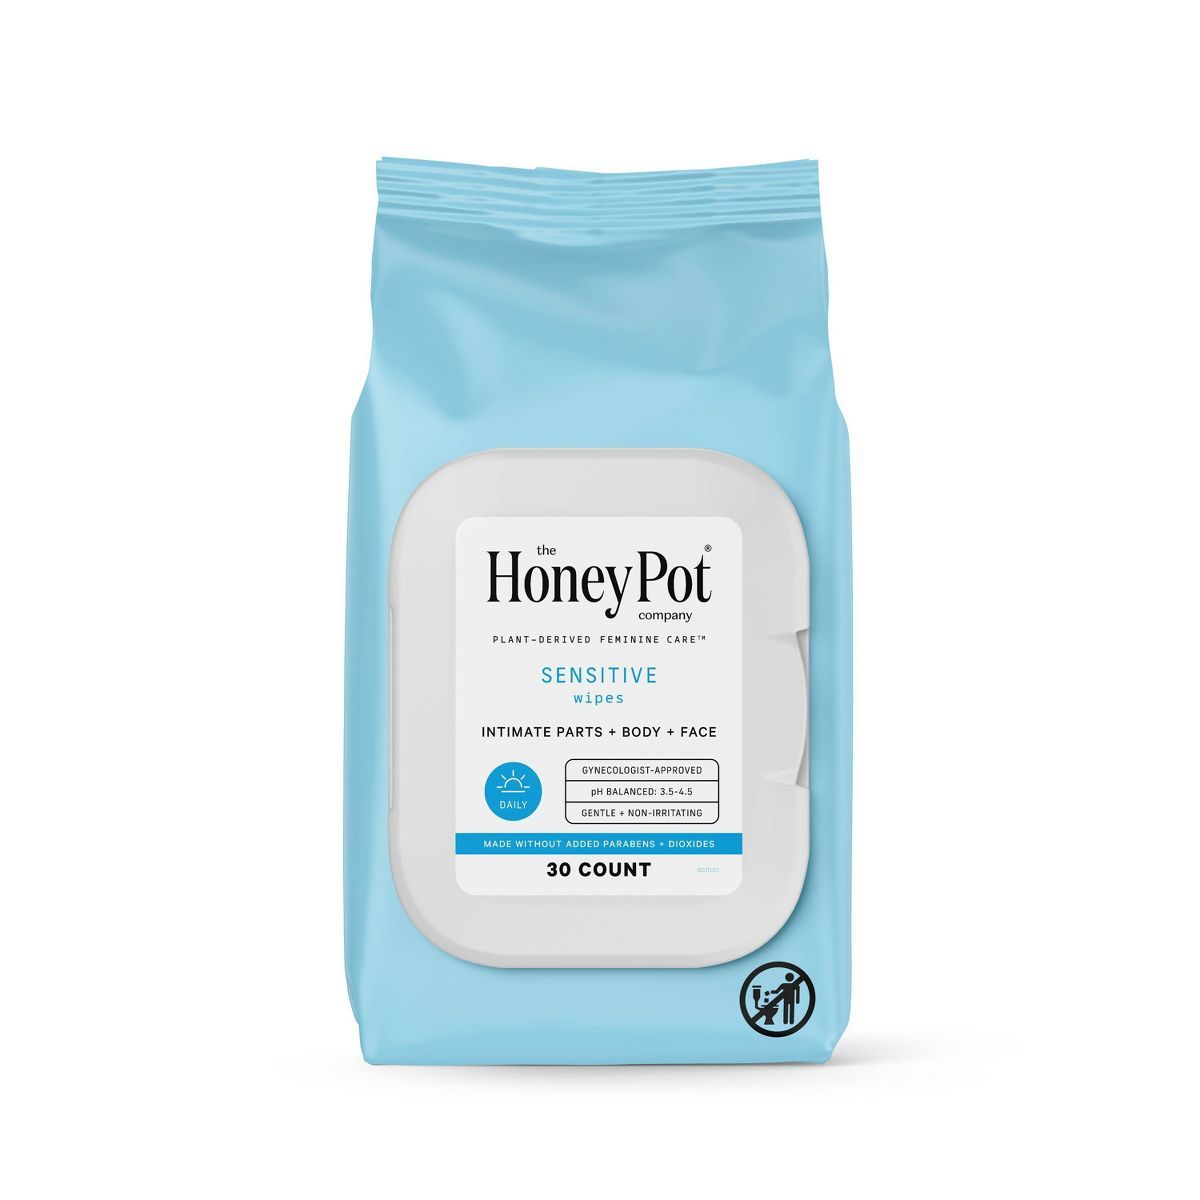 The Honey Pot Company, Sensitive Daily Feminine Cleansing Wipes, Intimate Parts, Body or Face | Target